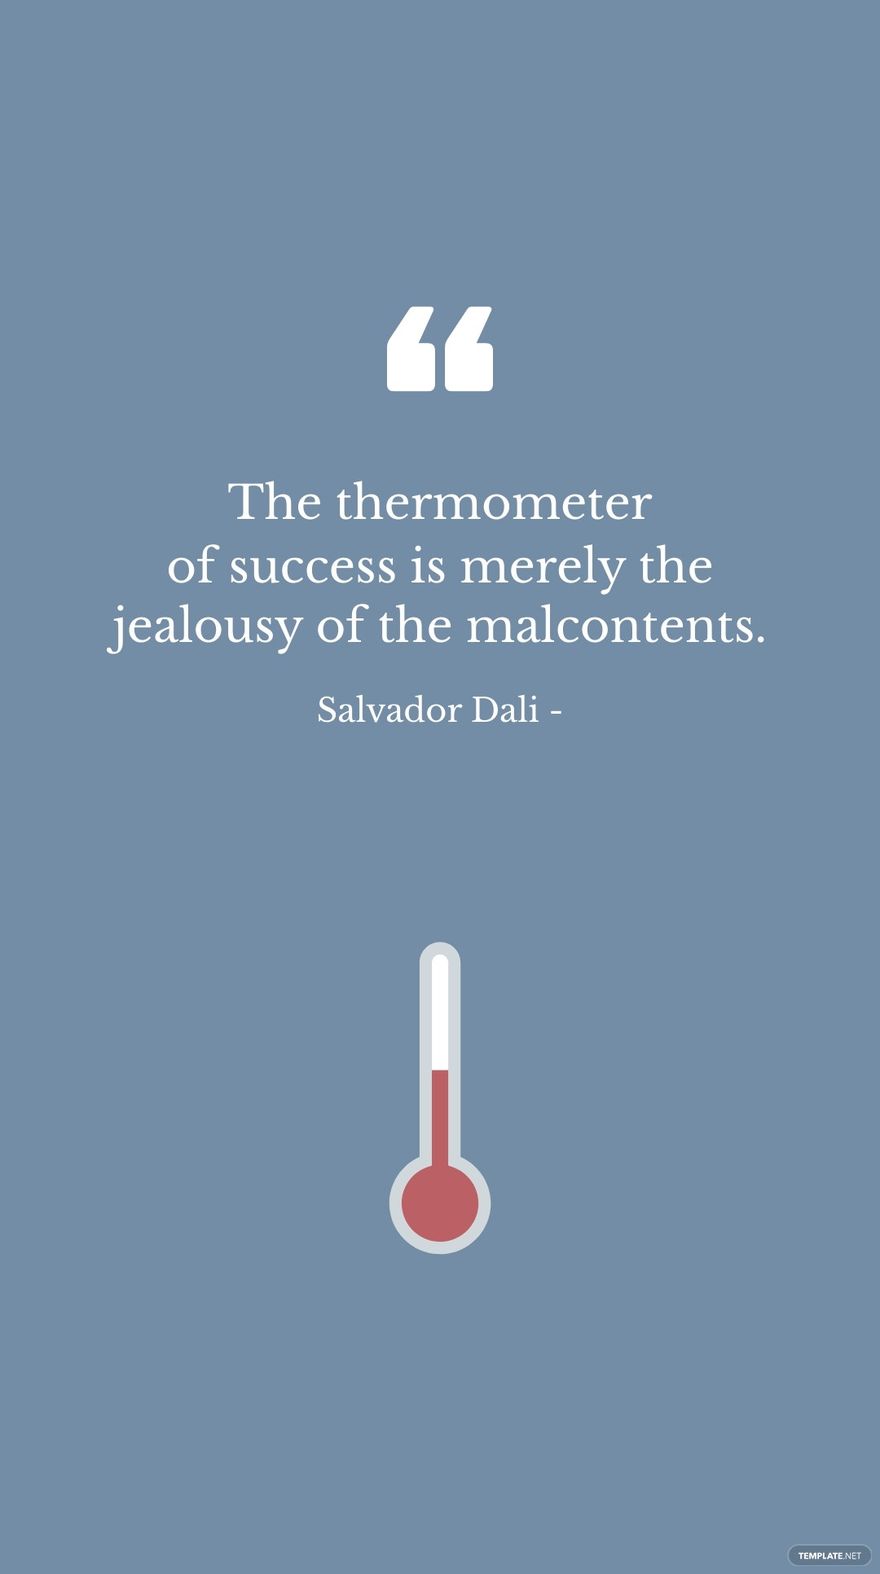 Free Salvador Dali - The thermometer of success is merely the jealousy of the malcontents. in JPG